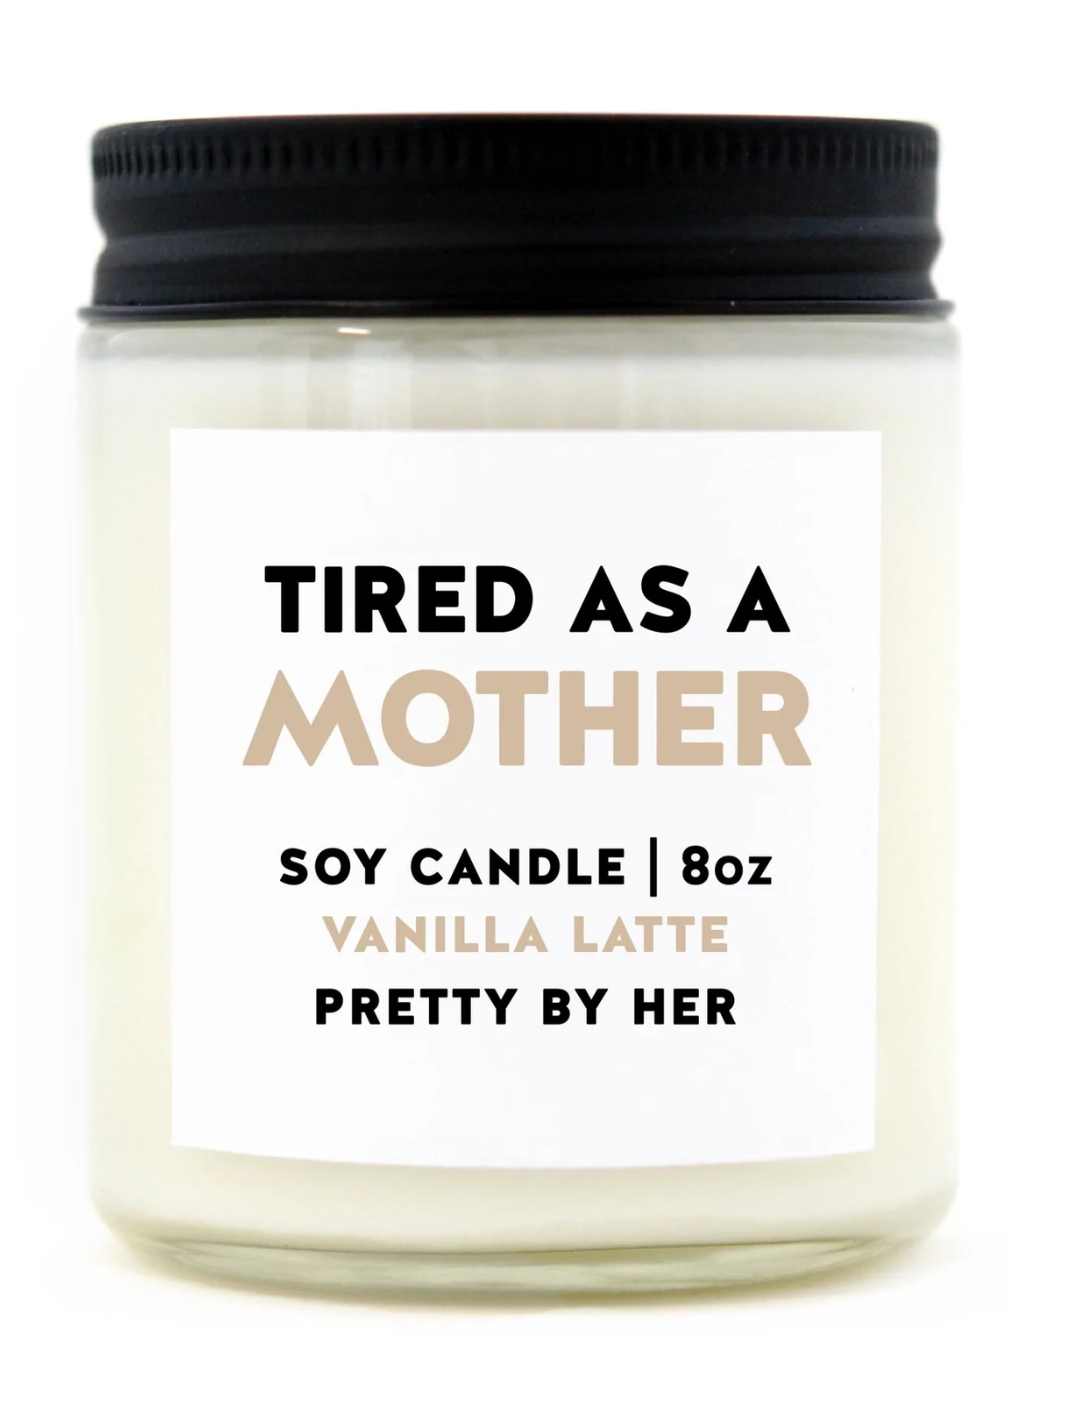 Tired as a Mother Candle